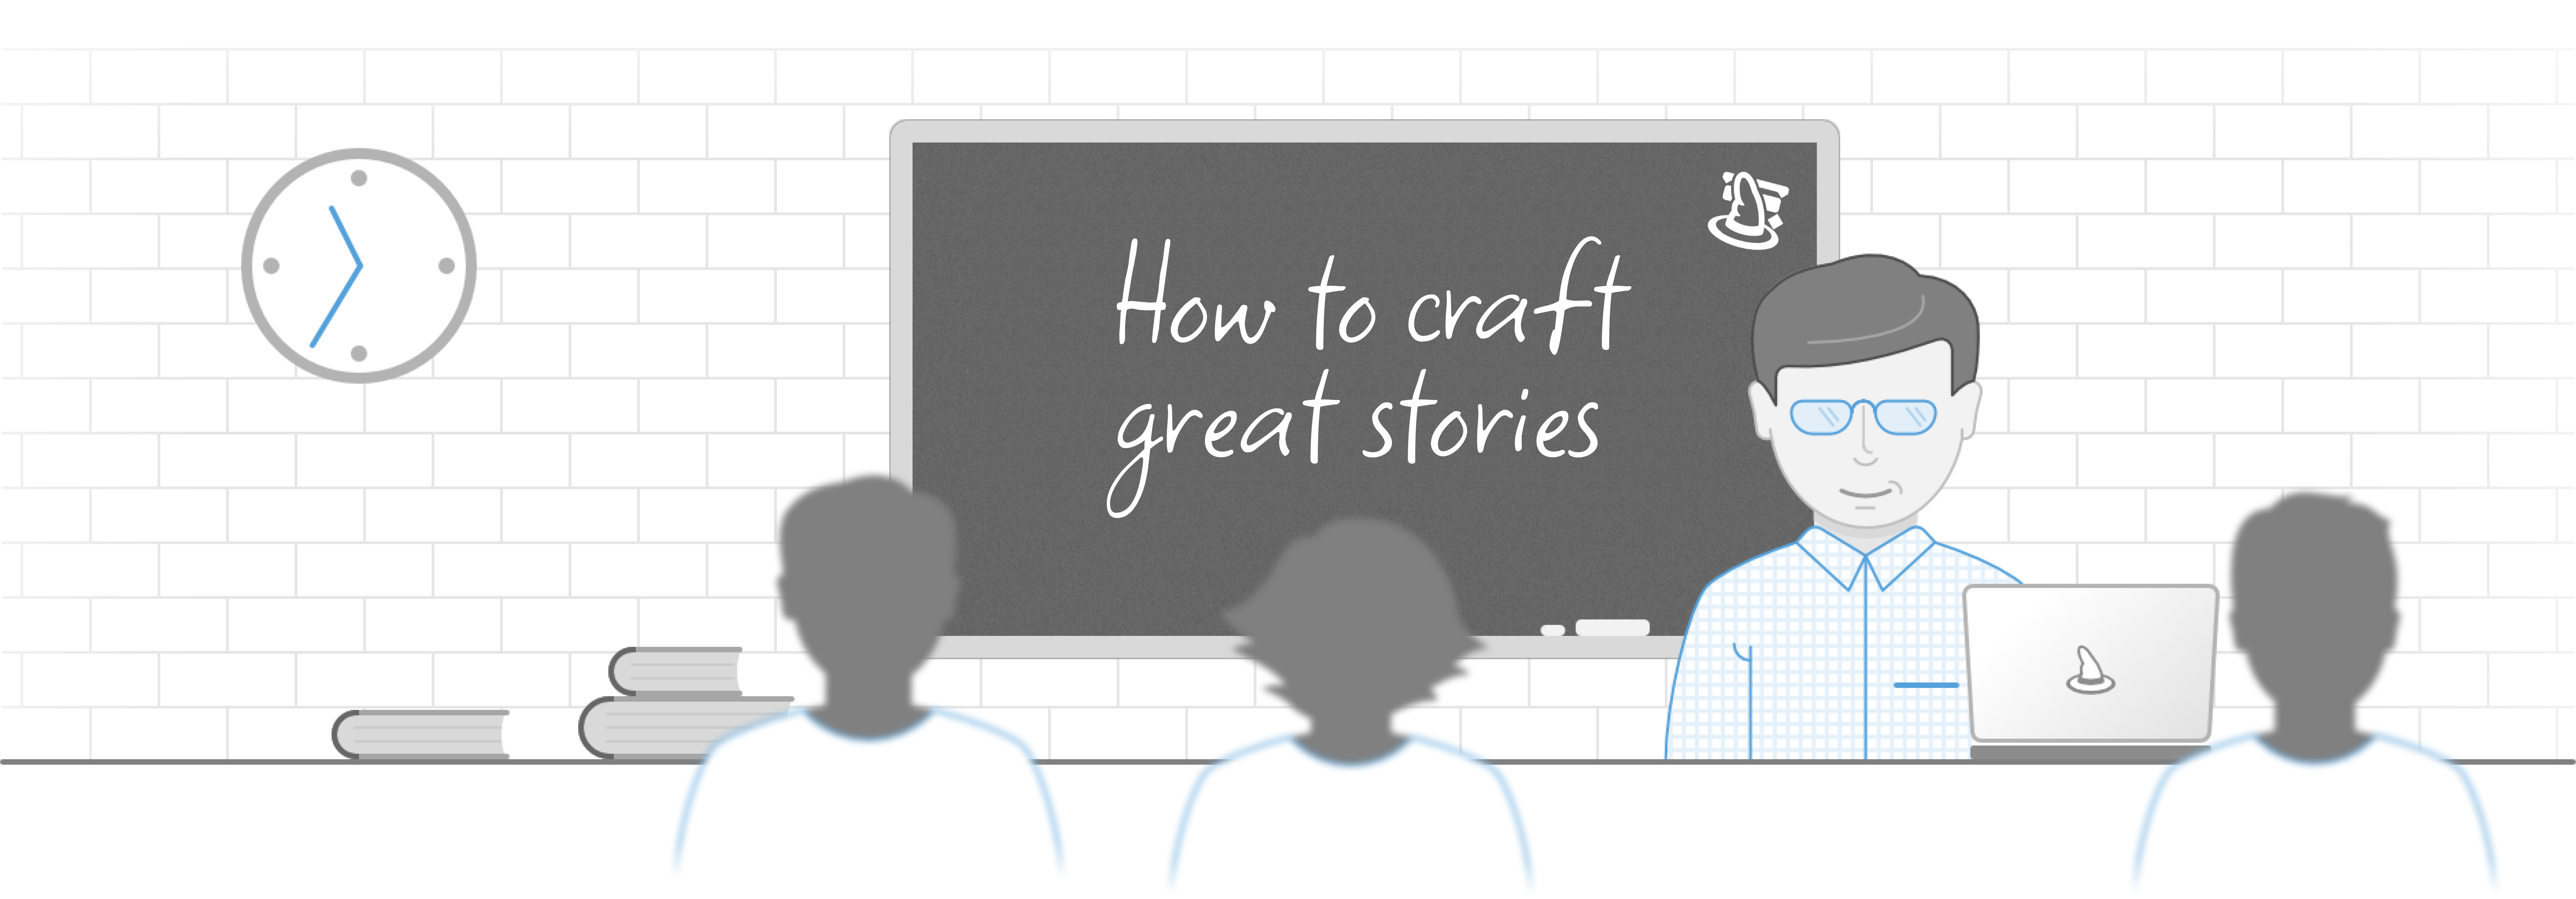 How to craft great stories